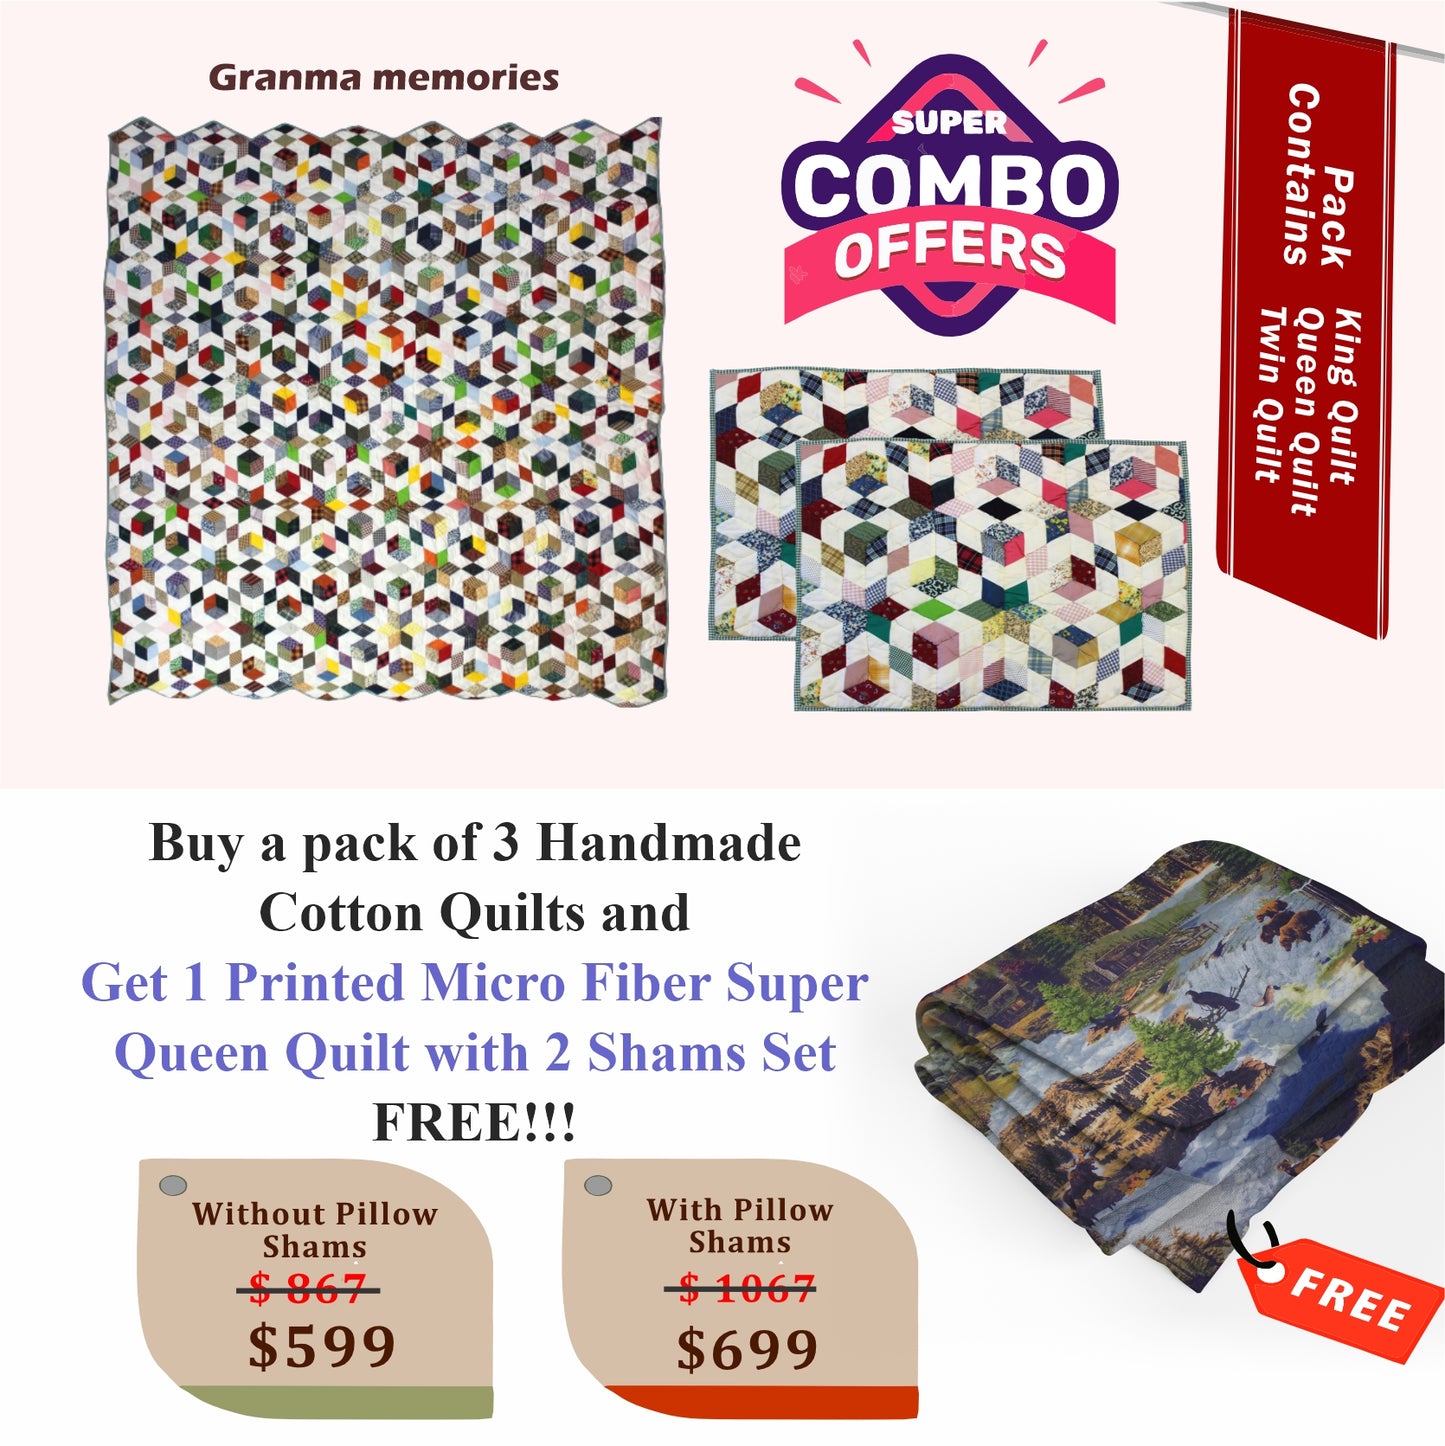 Granma Memory - Handmade Cotton quilts | Matching pillow shams | Buy 3 cotton quilts and get 1 Printed Microfiber Super Queen Quilt with 2 Shams set FREE